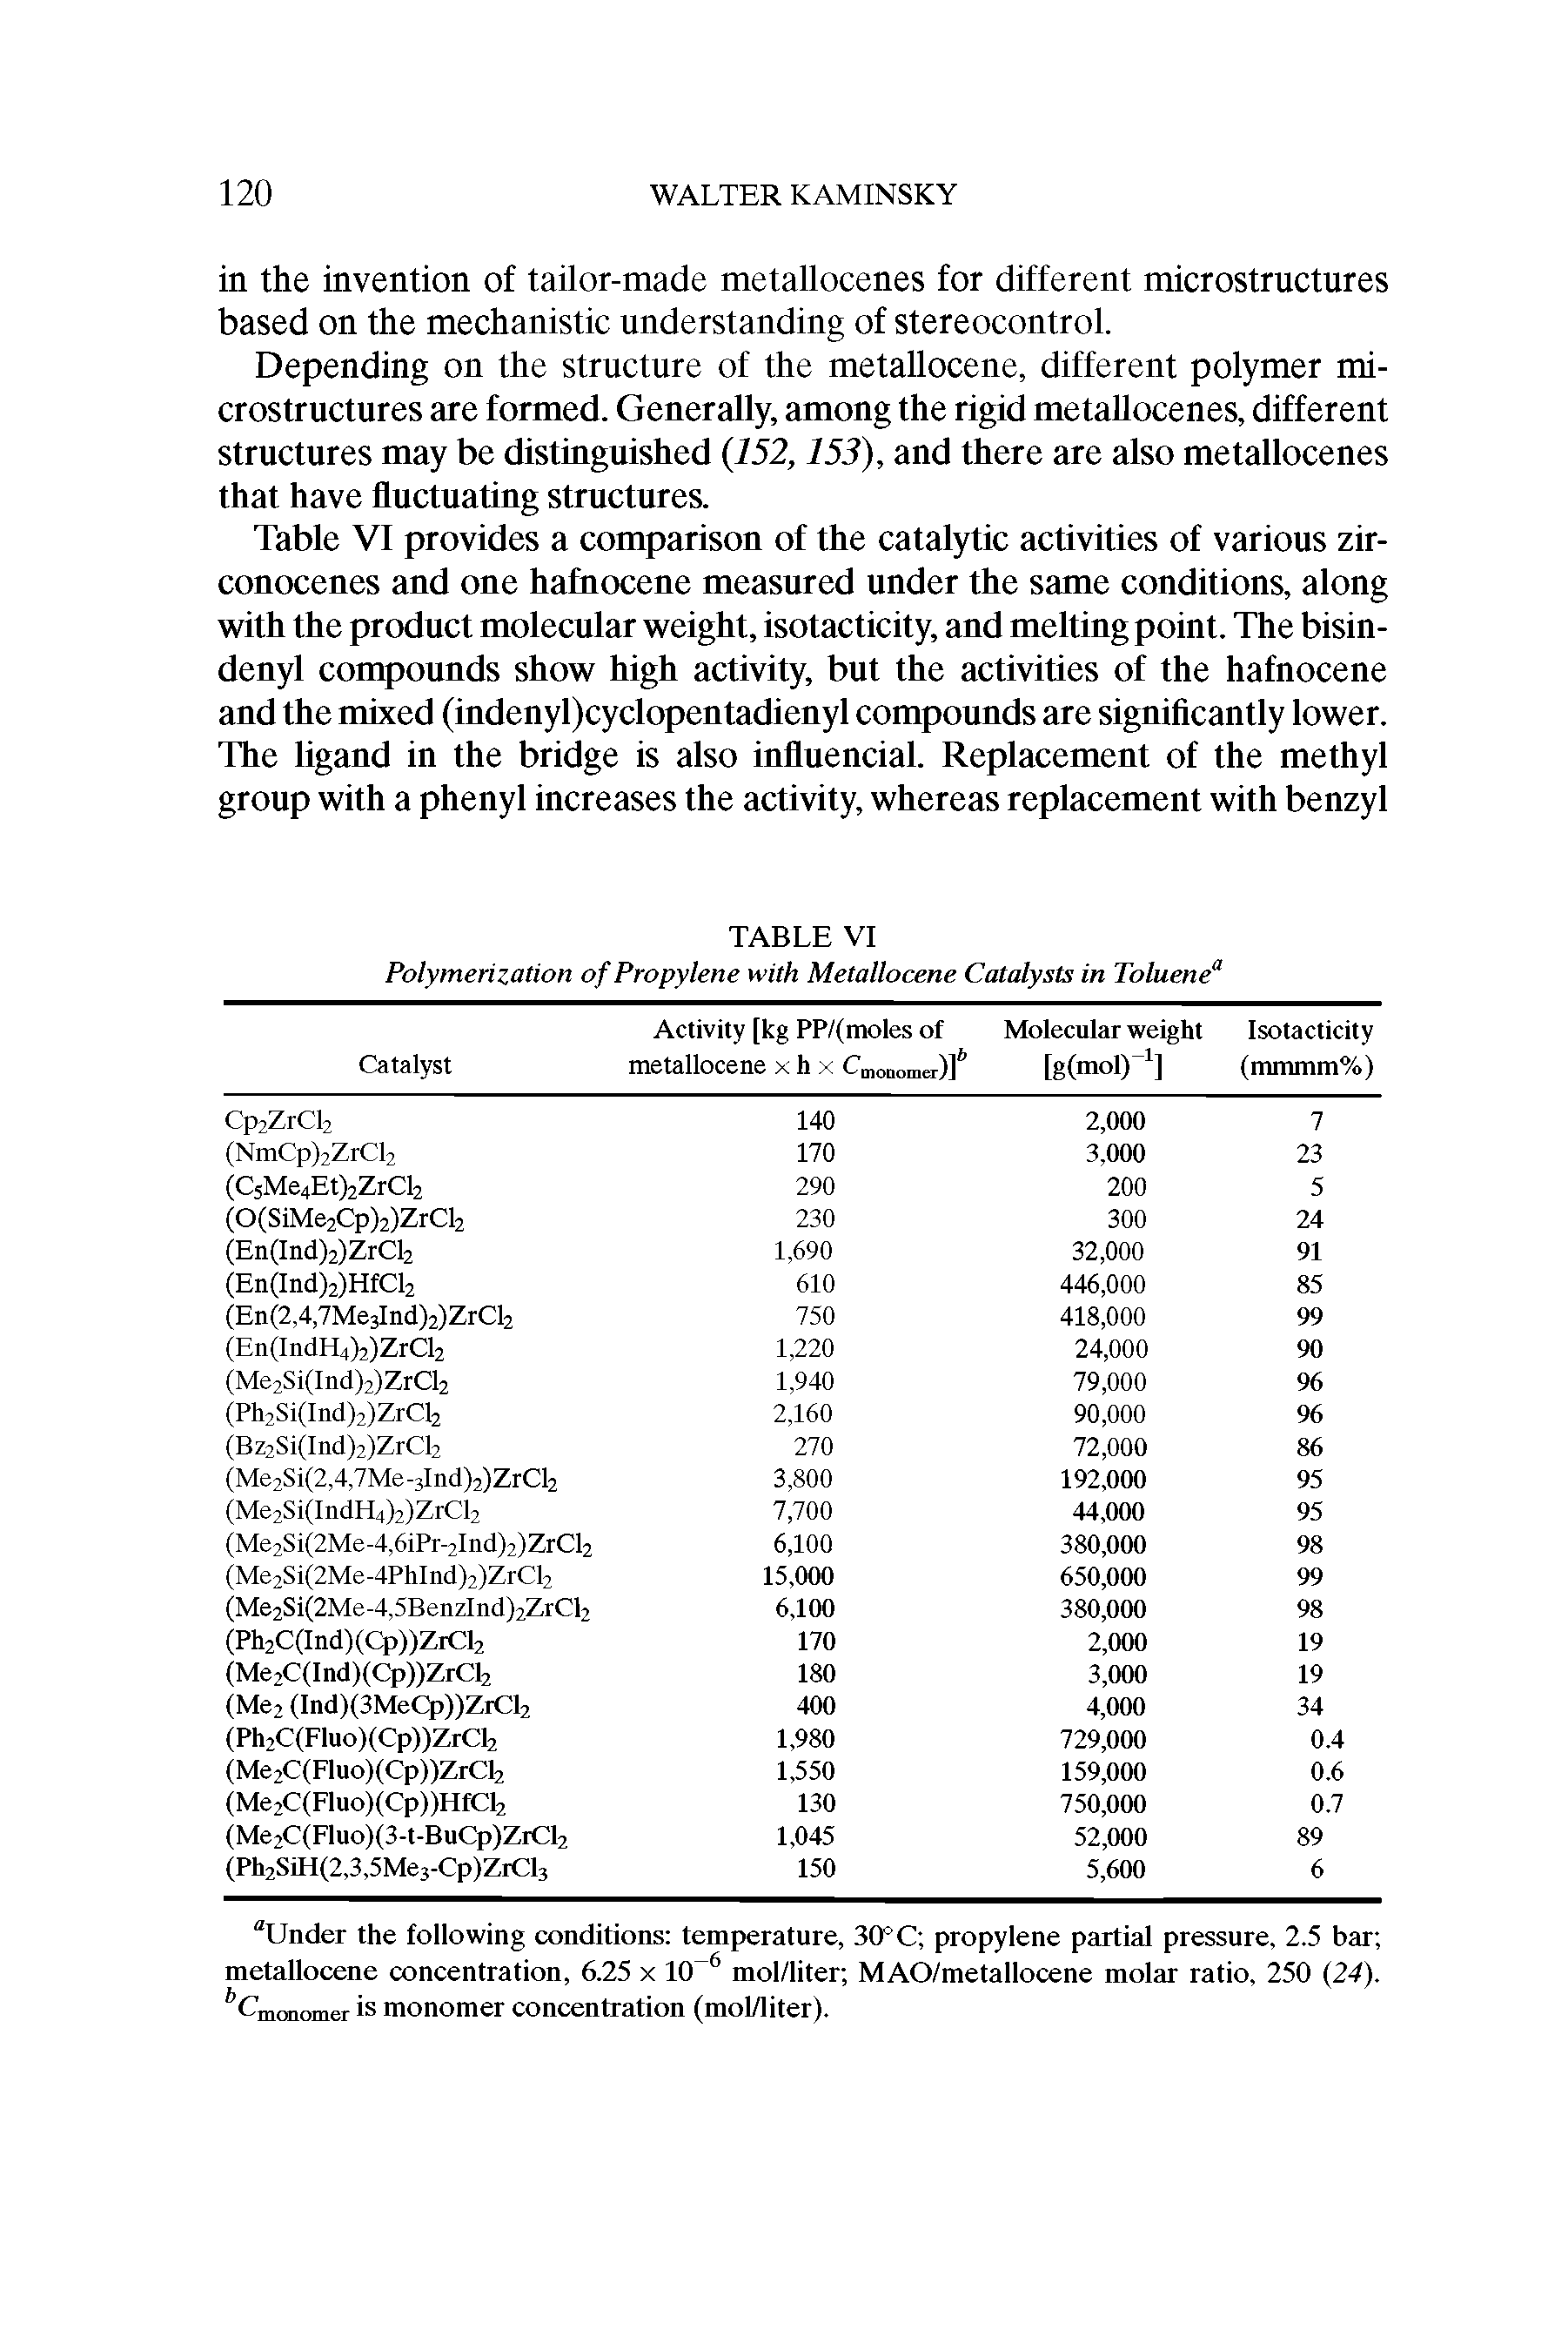 Table VI provides a comparison of the catalytic activities of various zir-conocenes and one hafnocene measured under the same conditions, along with the product molecular weight, isotacticity, and melting point. The bisin-denyl compounds show high activity, but the activities of the hafnocene and the mixed (indenyl)cyclopentadienyl compounds are significantly lower. The ligand in the bridge is also influencial. Replacement of the methyl group with a phenyl increases the activity, whereas replacement with benzyl...